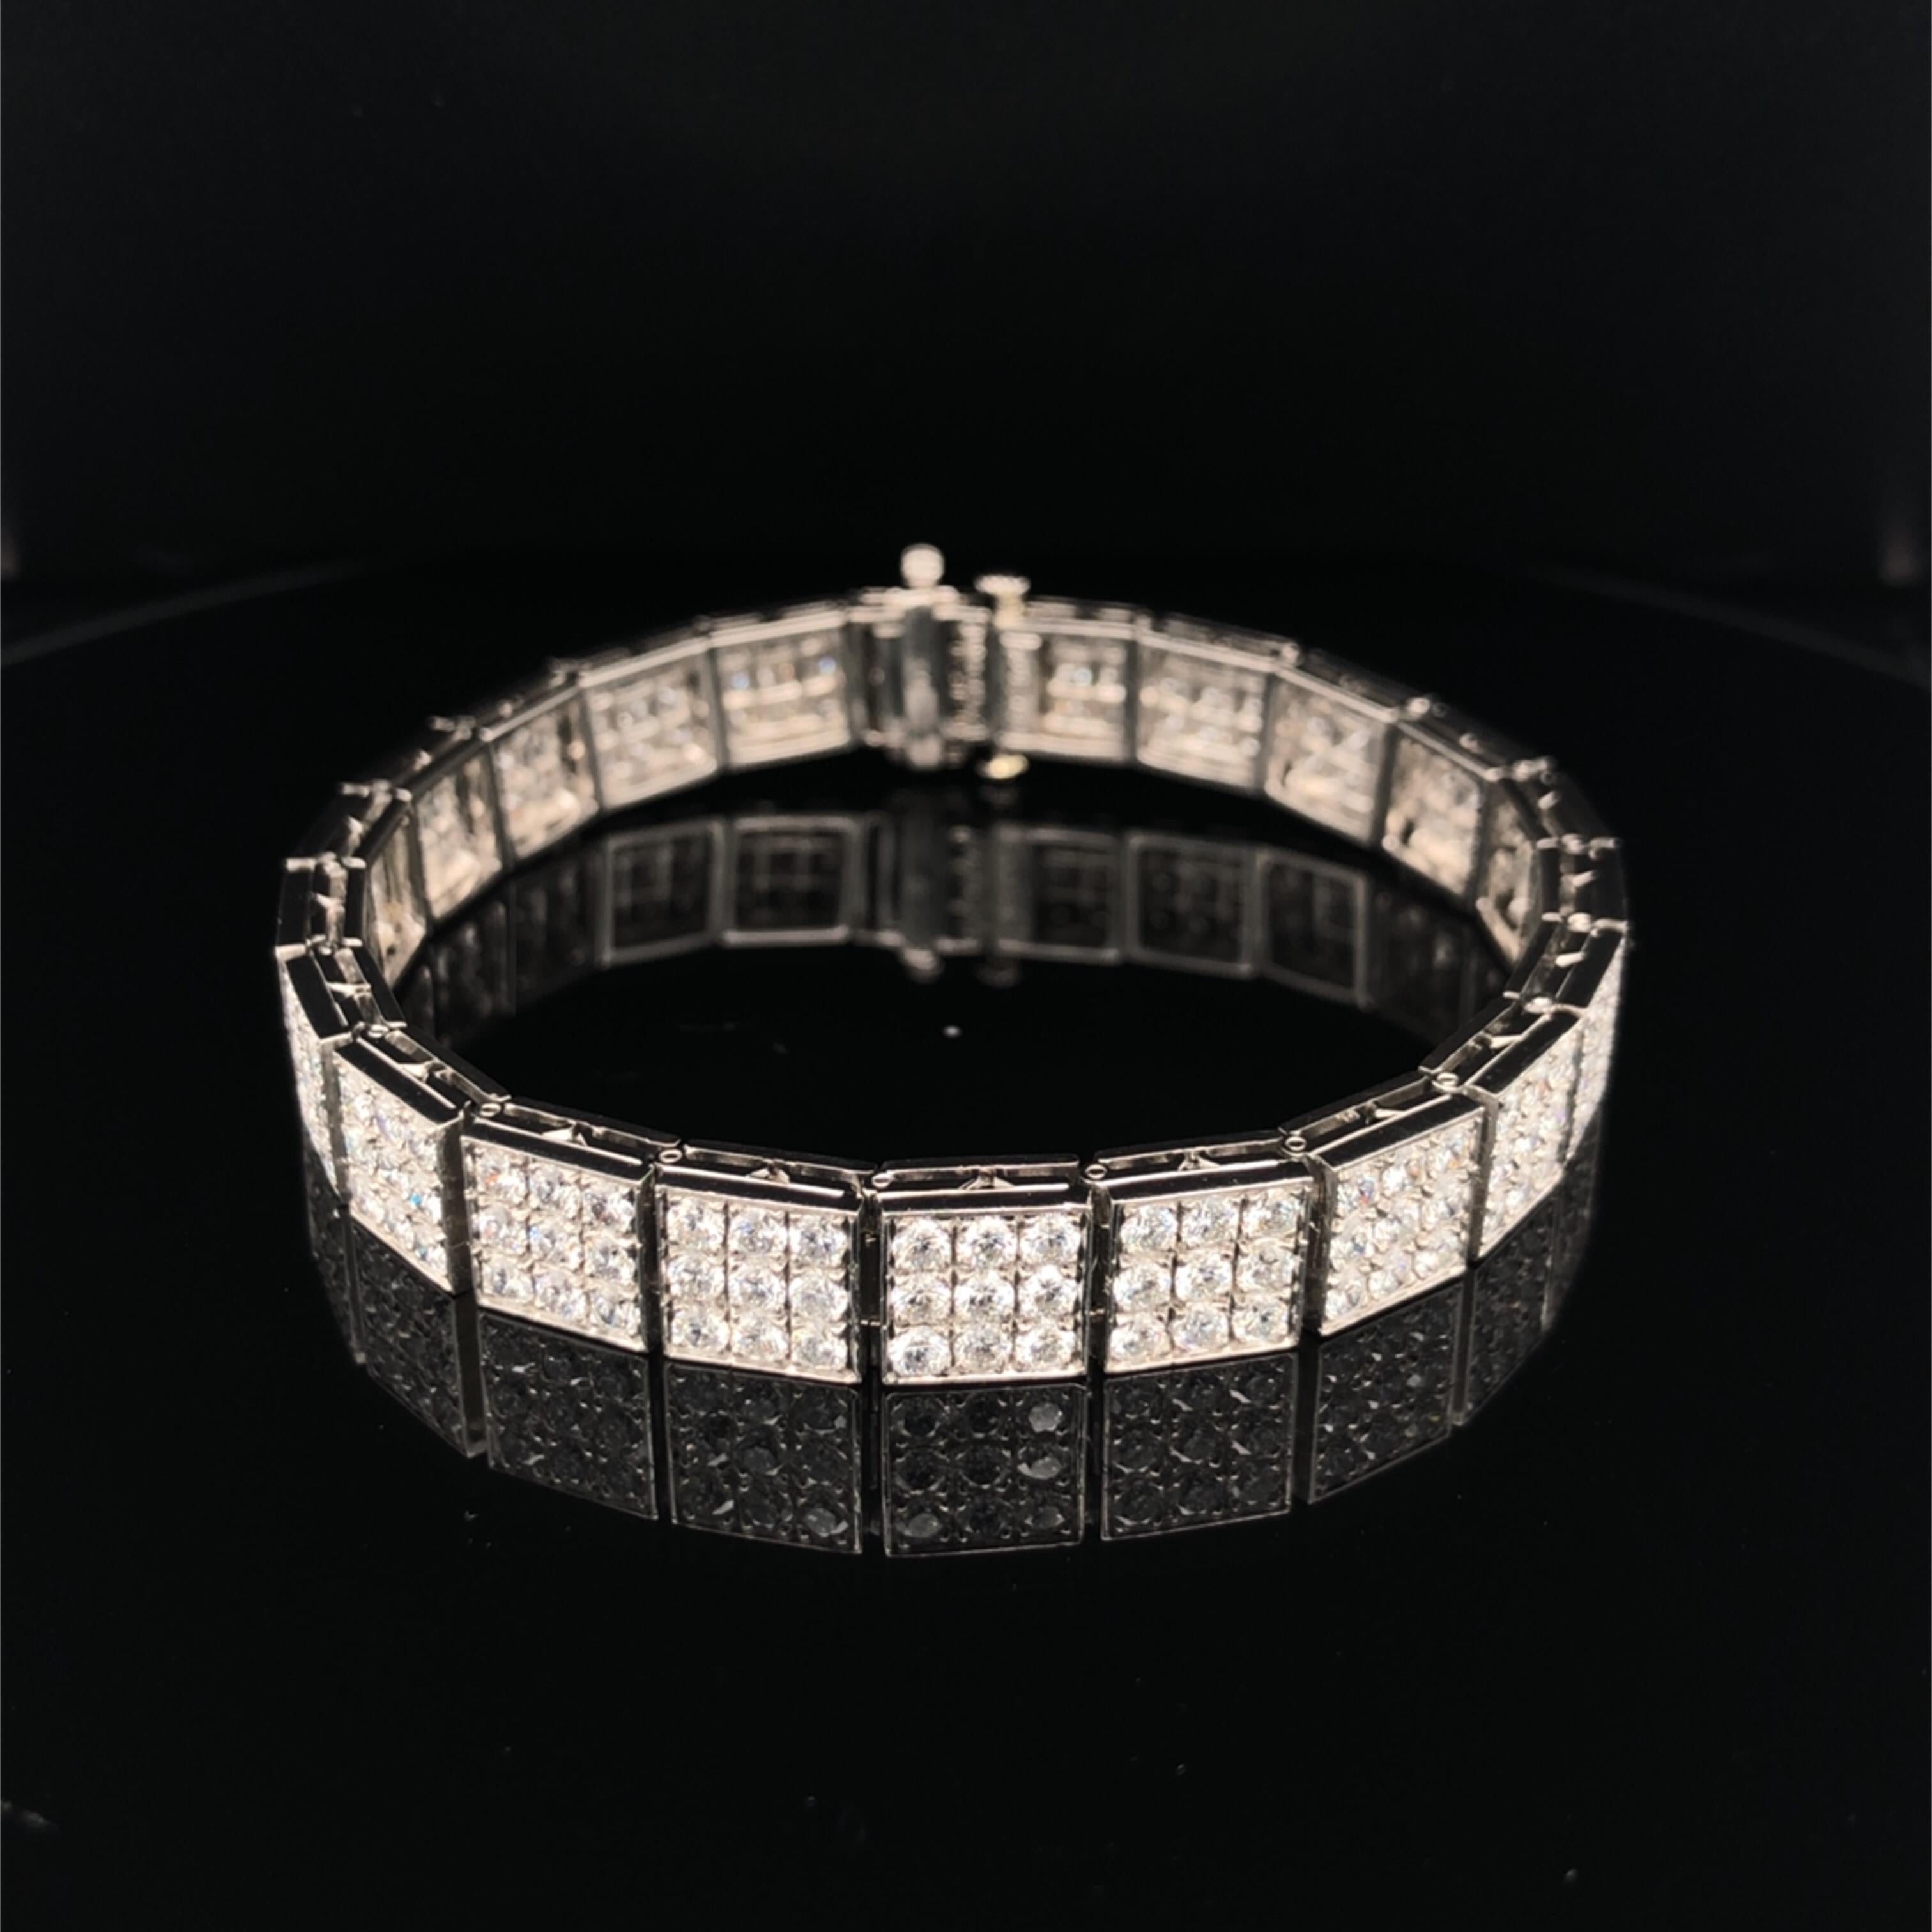 This Oscar Heyman platinum bracelet contains 198 round diamonds weighing 8.32 cts. (F-G/VS quality) set in ornaments featured a 3x3 square. It is stamped with the makers mark, IRID PLAT, and serial number 803845.

The bracelet measures 7'' in length